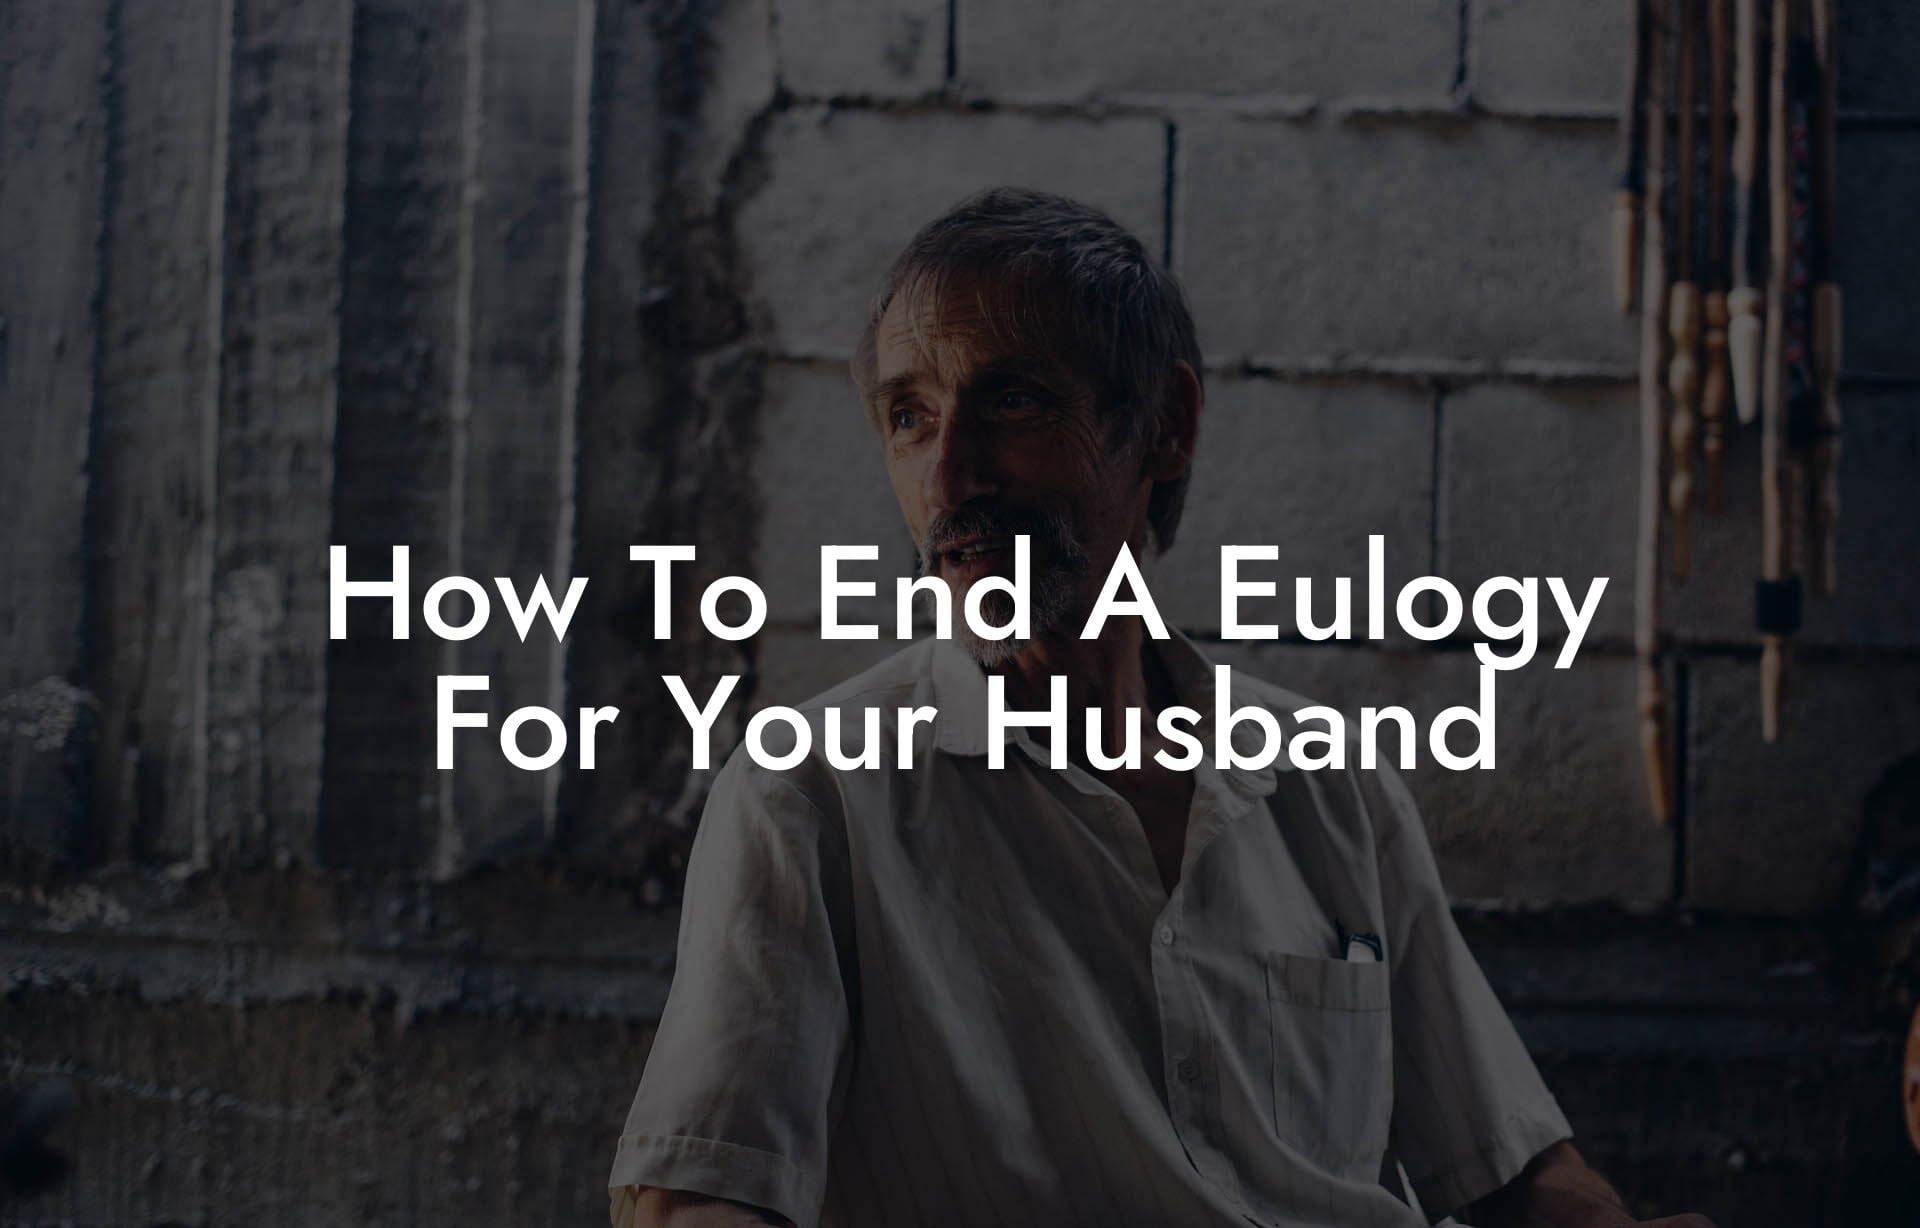 How To End A Eulogy For Your Husband